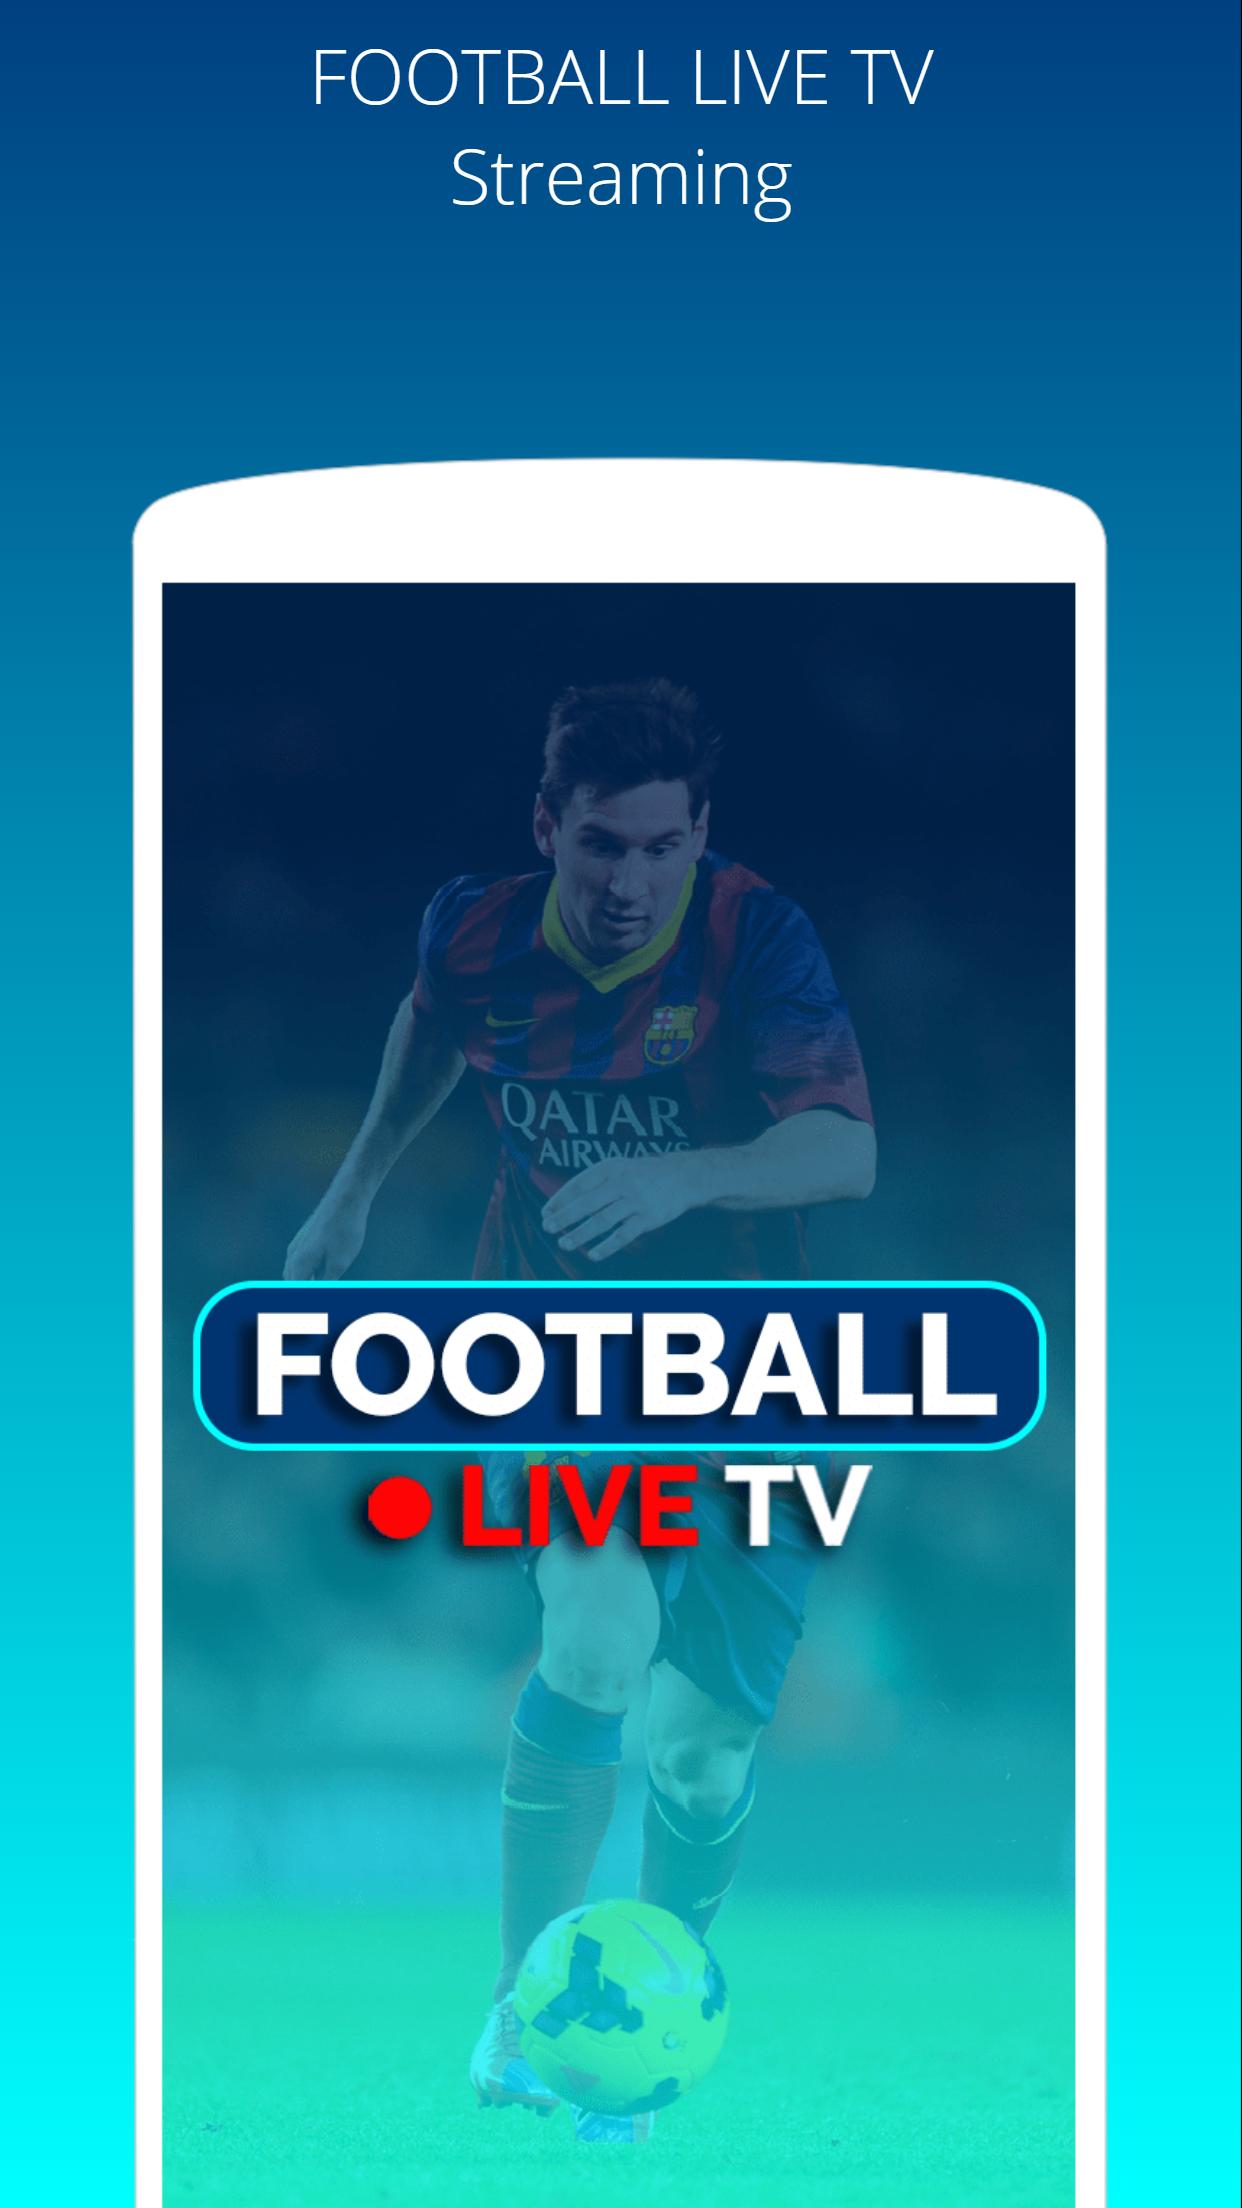 Football Live Tv Streaming for Android - APK Download